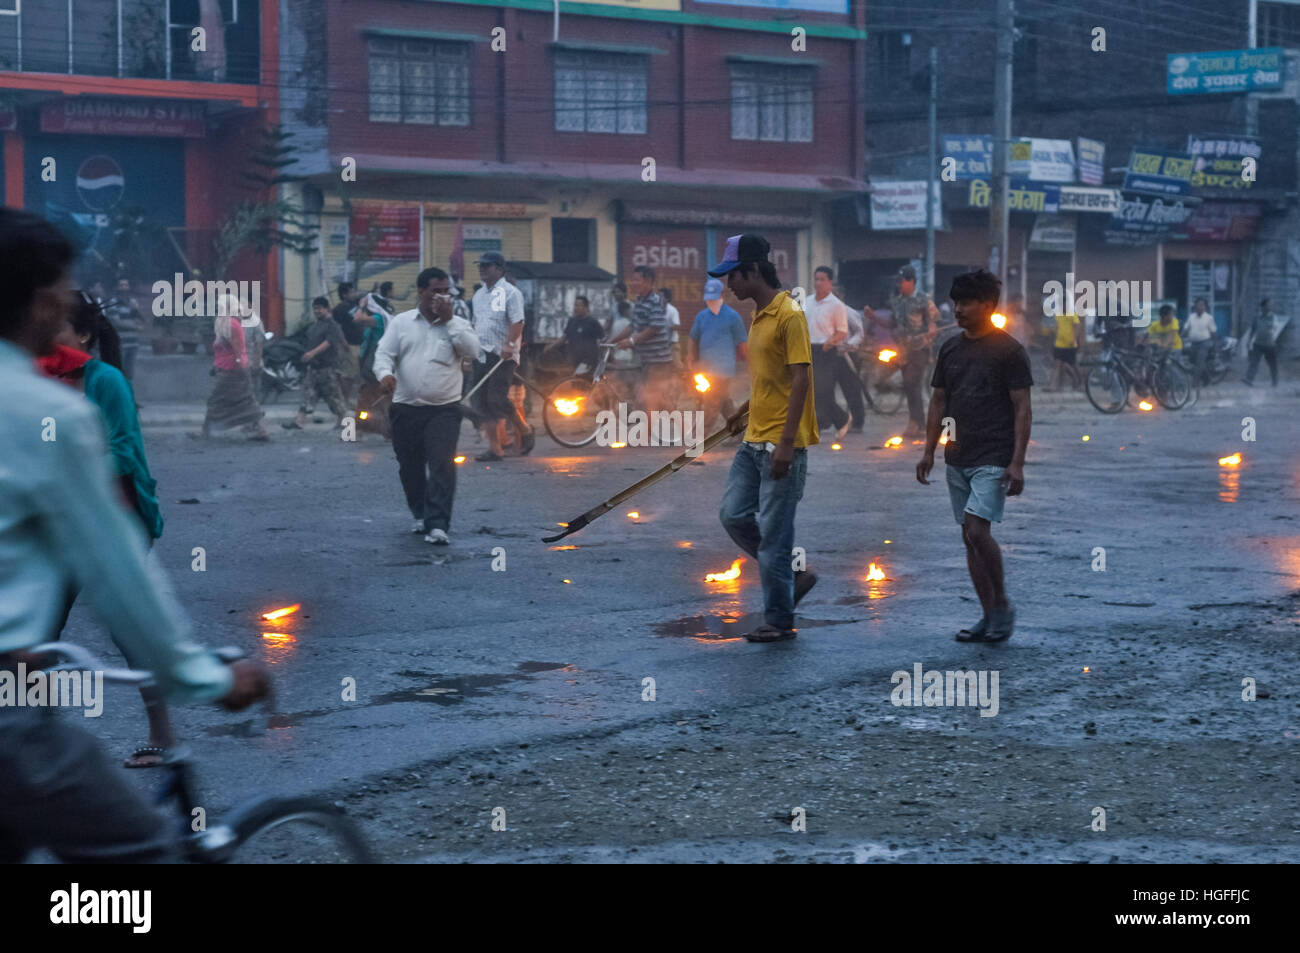 Nepal - circa May 2012: Photo of people walking or riding bicycles on street with burning torches in hands on rainy day during Nepal general strike. D Stock Photo